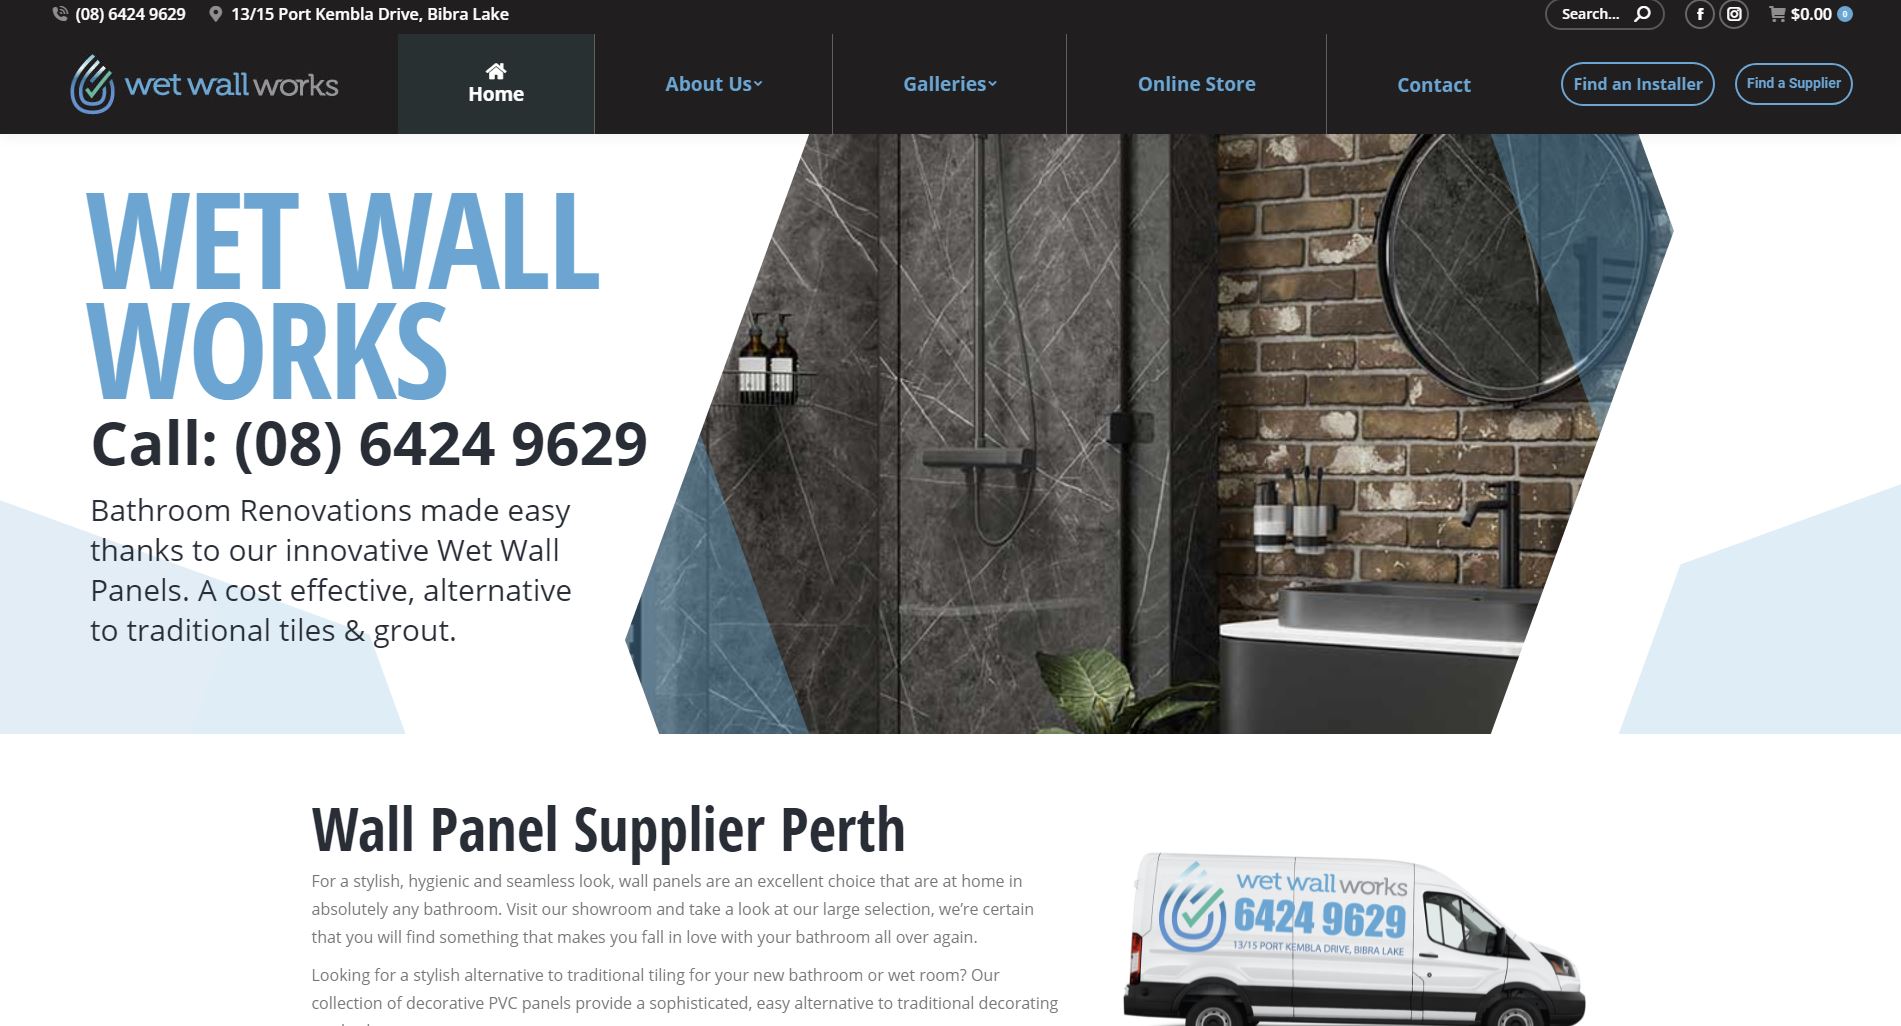 Wet Wall Works - Wall Panel Supplier Perth WA